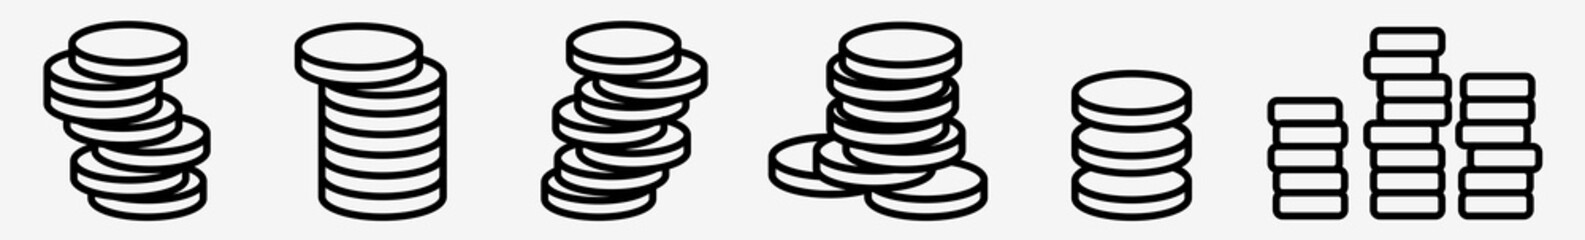 Coin Icon Coin Pile Casino Chips Set | Coins Icon Money Stack Vector Finance Illustration Logo | Coin-Icon Isolated Coin Savings Collection